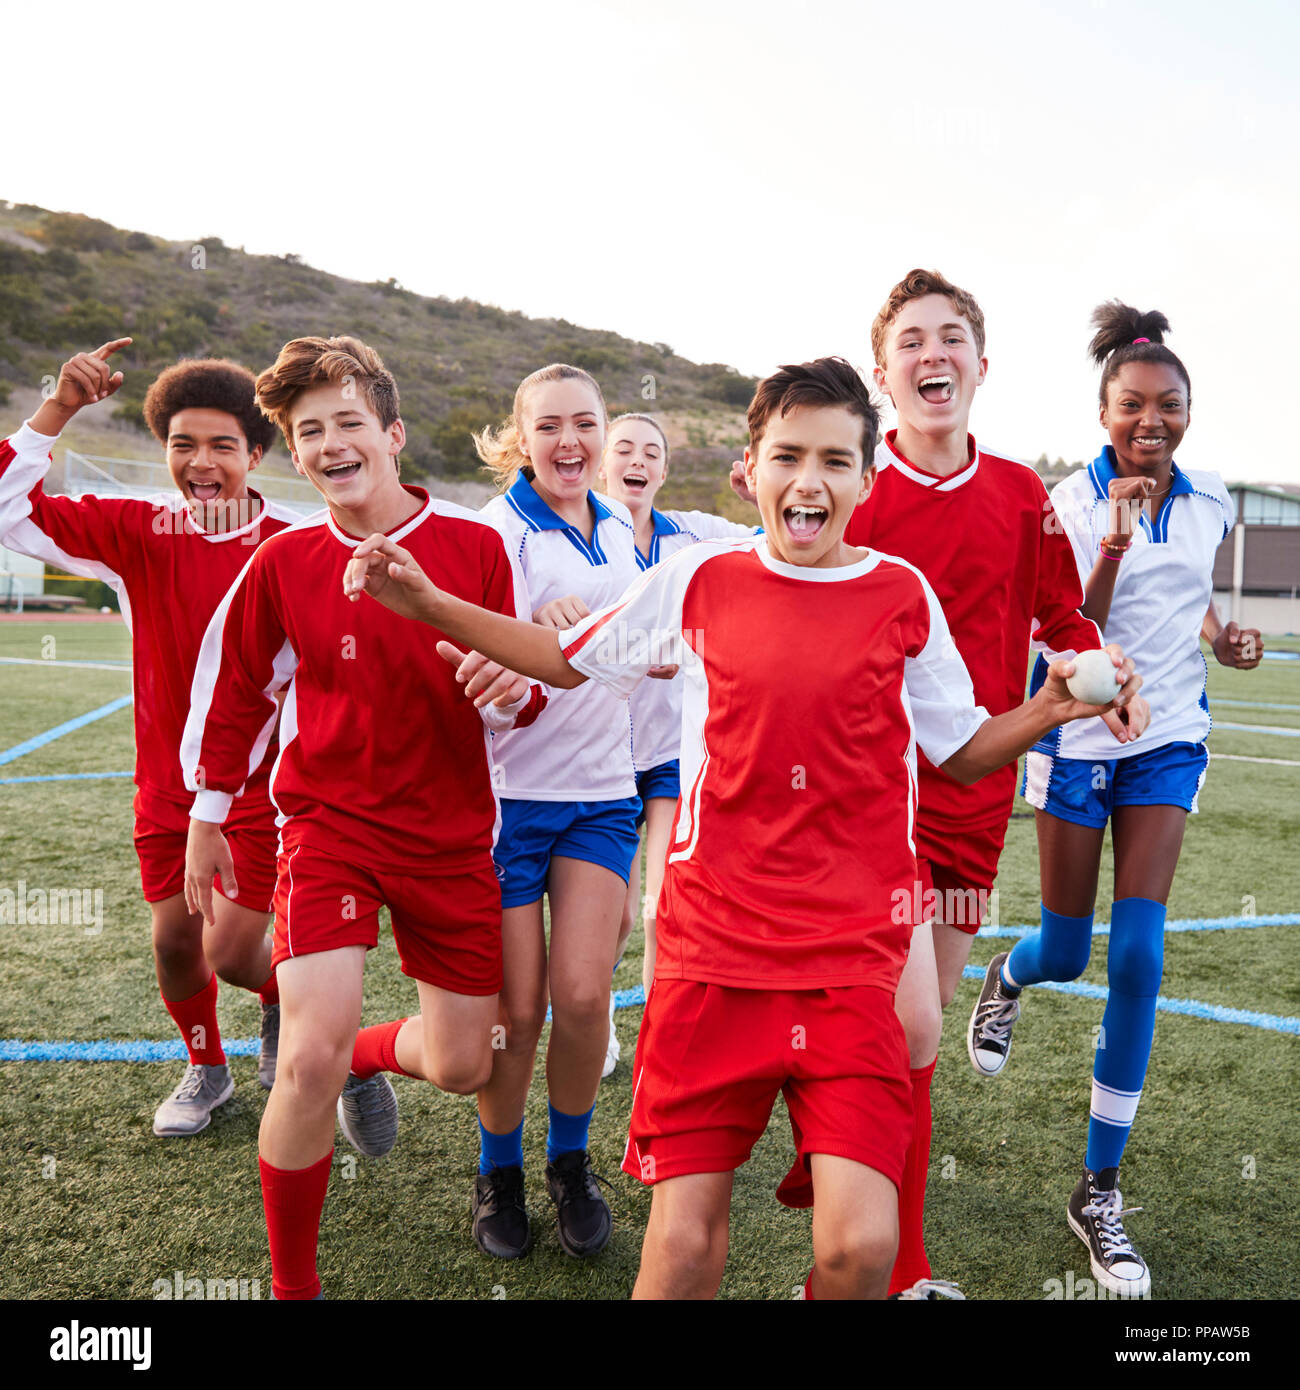 Portrait Of Male And Female High School Soccer Teams Celebrating Stock Photo